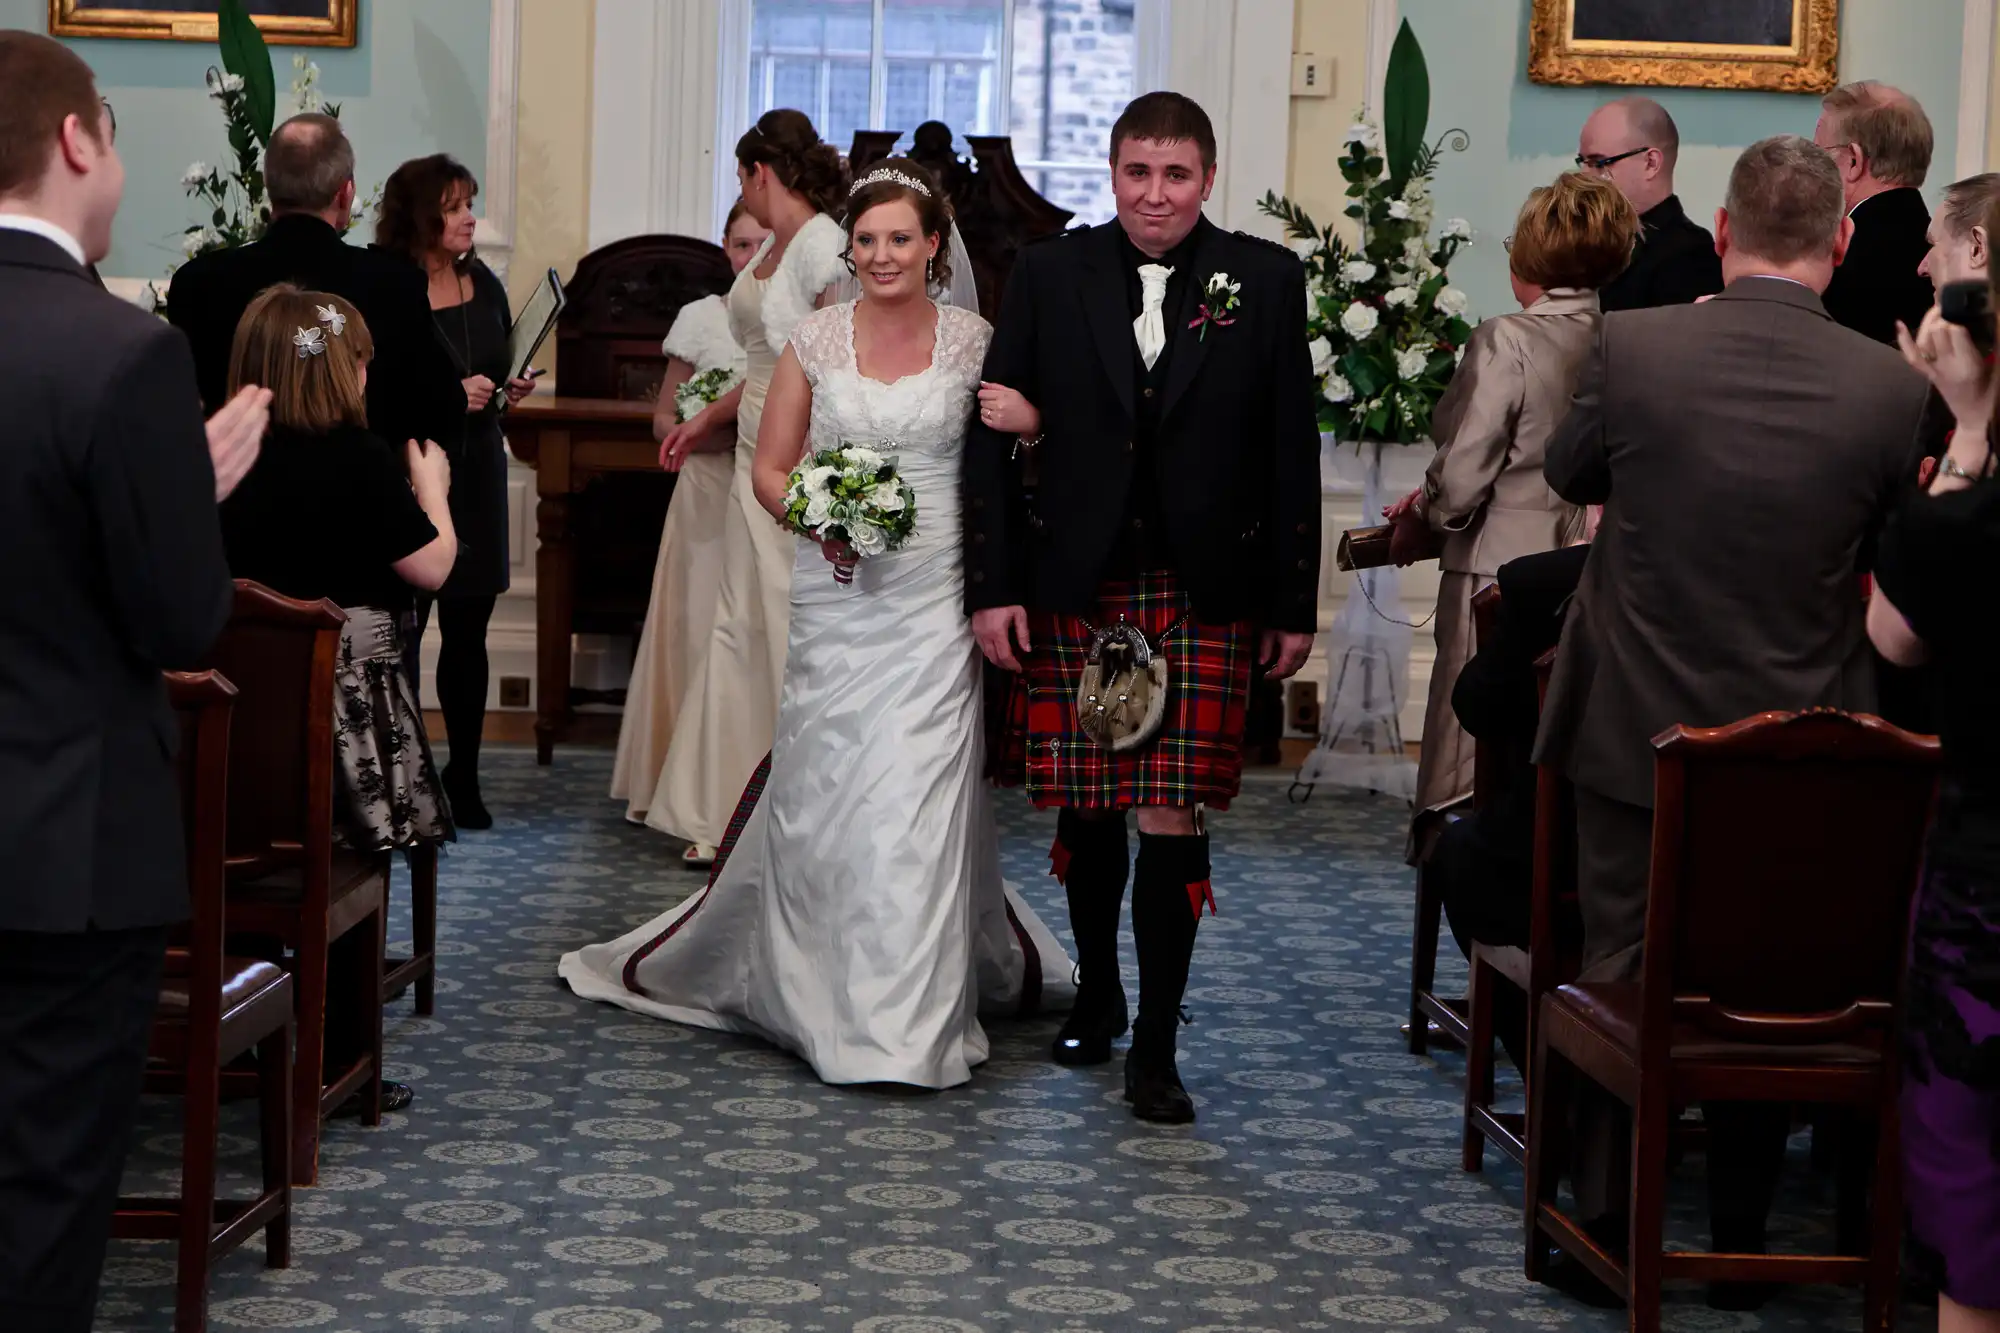 Bride in a white dress and groom in a kilt walking down the aisle, smiling, with guests applauding in a decorated room.